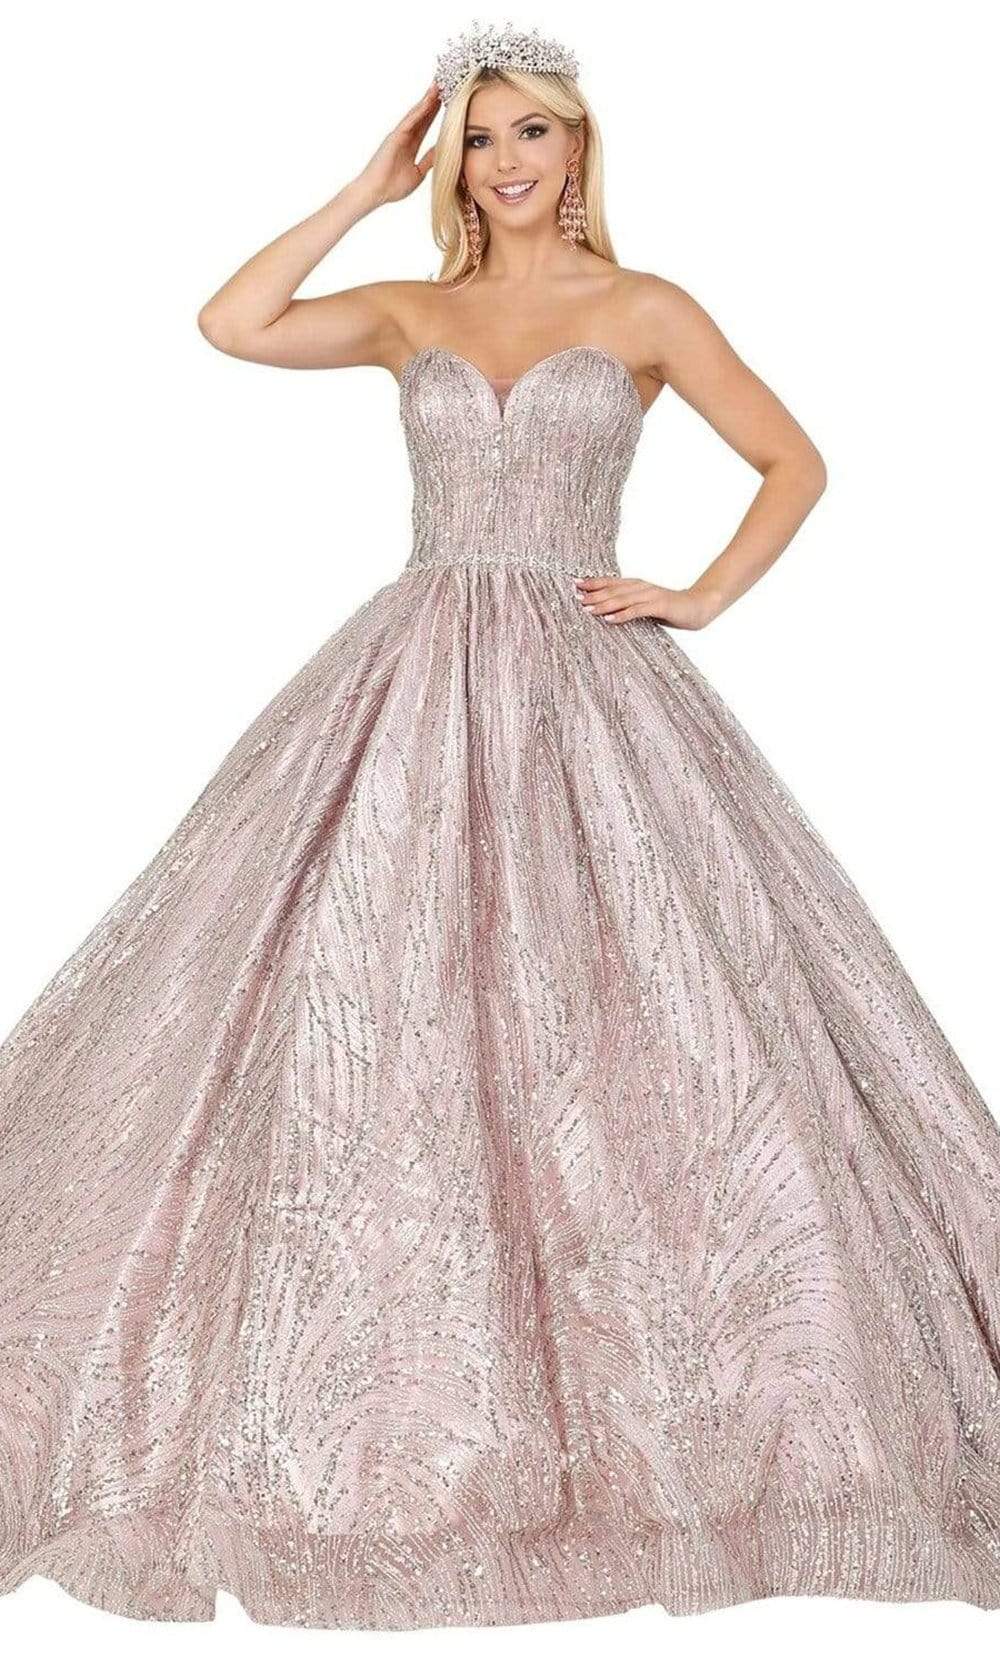 Dancing Queen - 1453 Embellished Strapless Sweetheart Ballgown Quinceanera Dresses